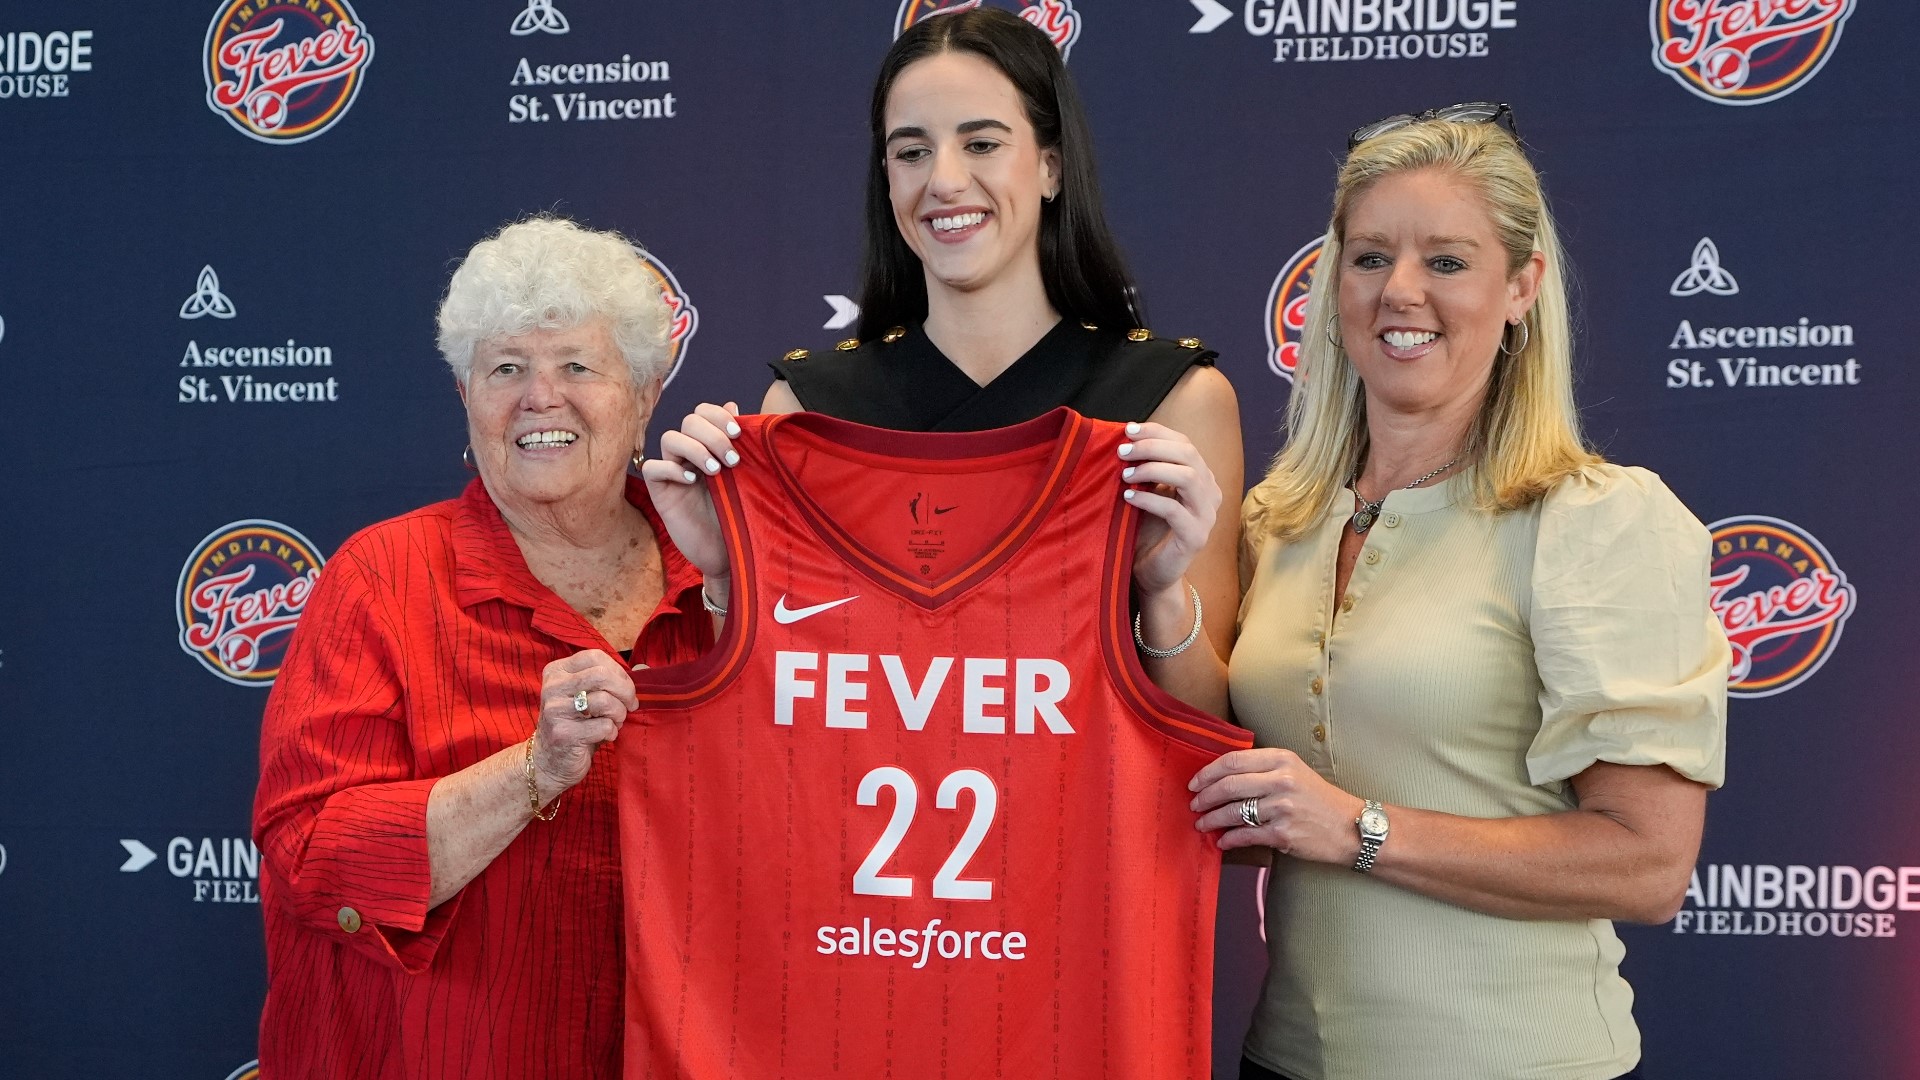 Apart from Nike, Caitlin Clark has utilized her likeness in sponsorship deals with State Farm, Panini America and Gainbridge.